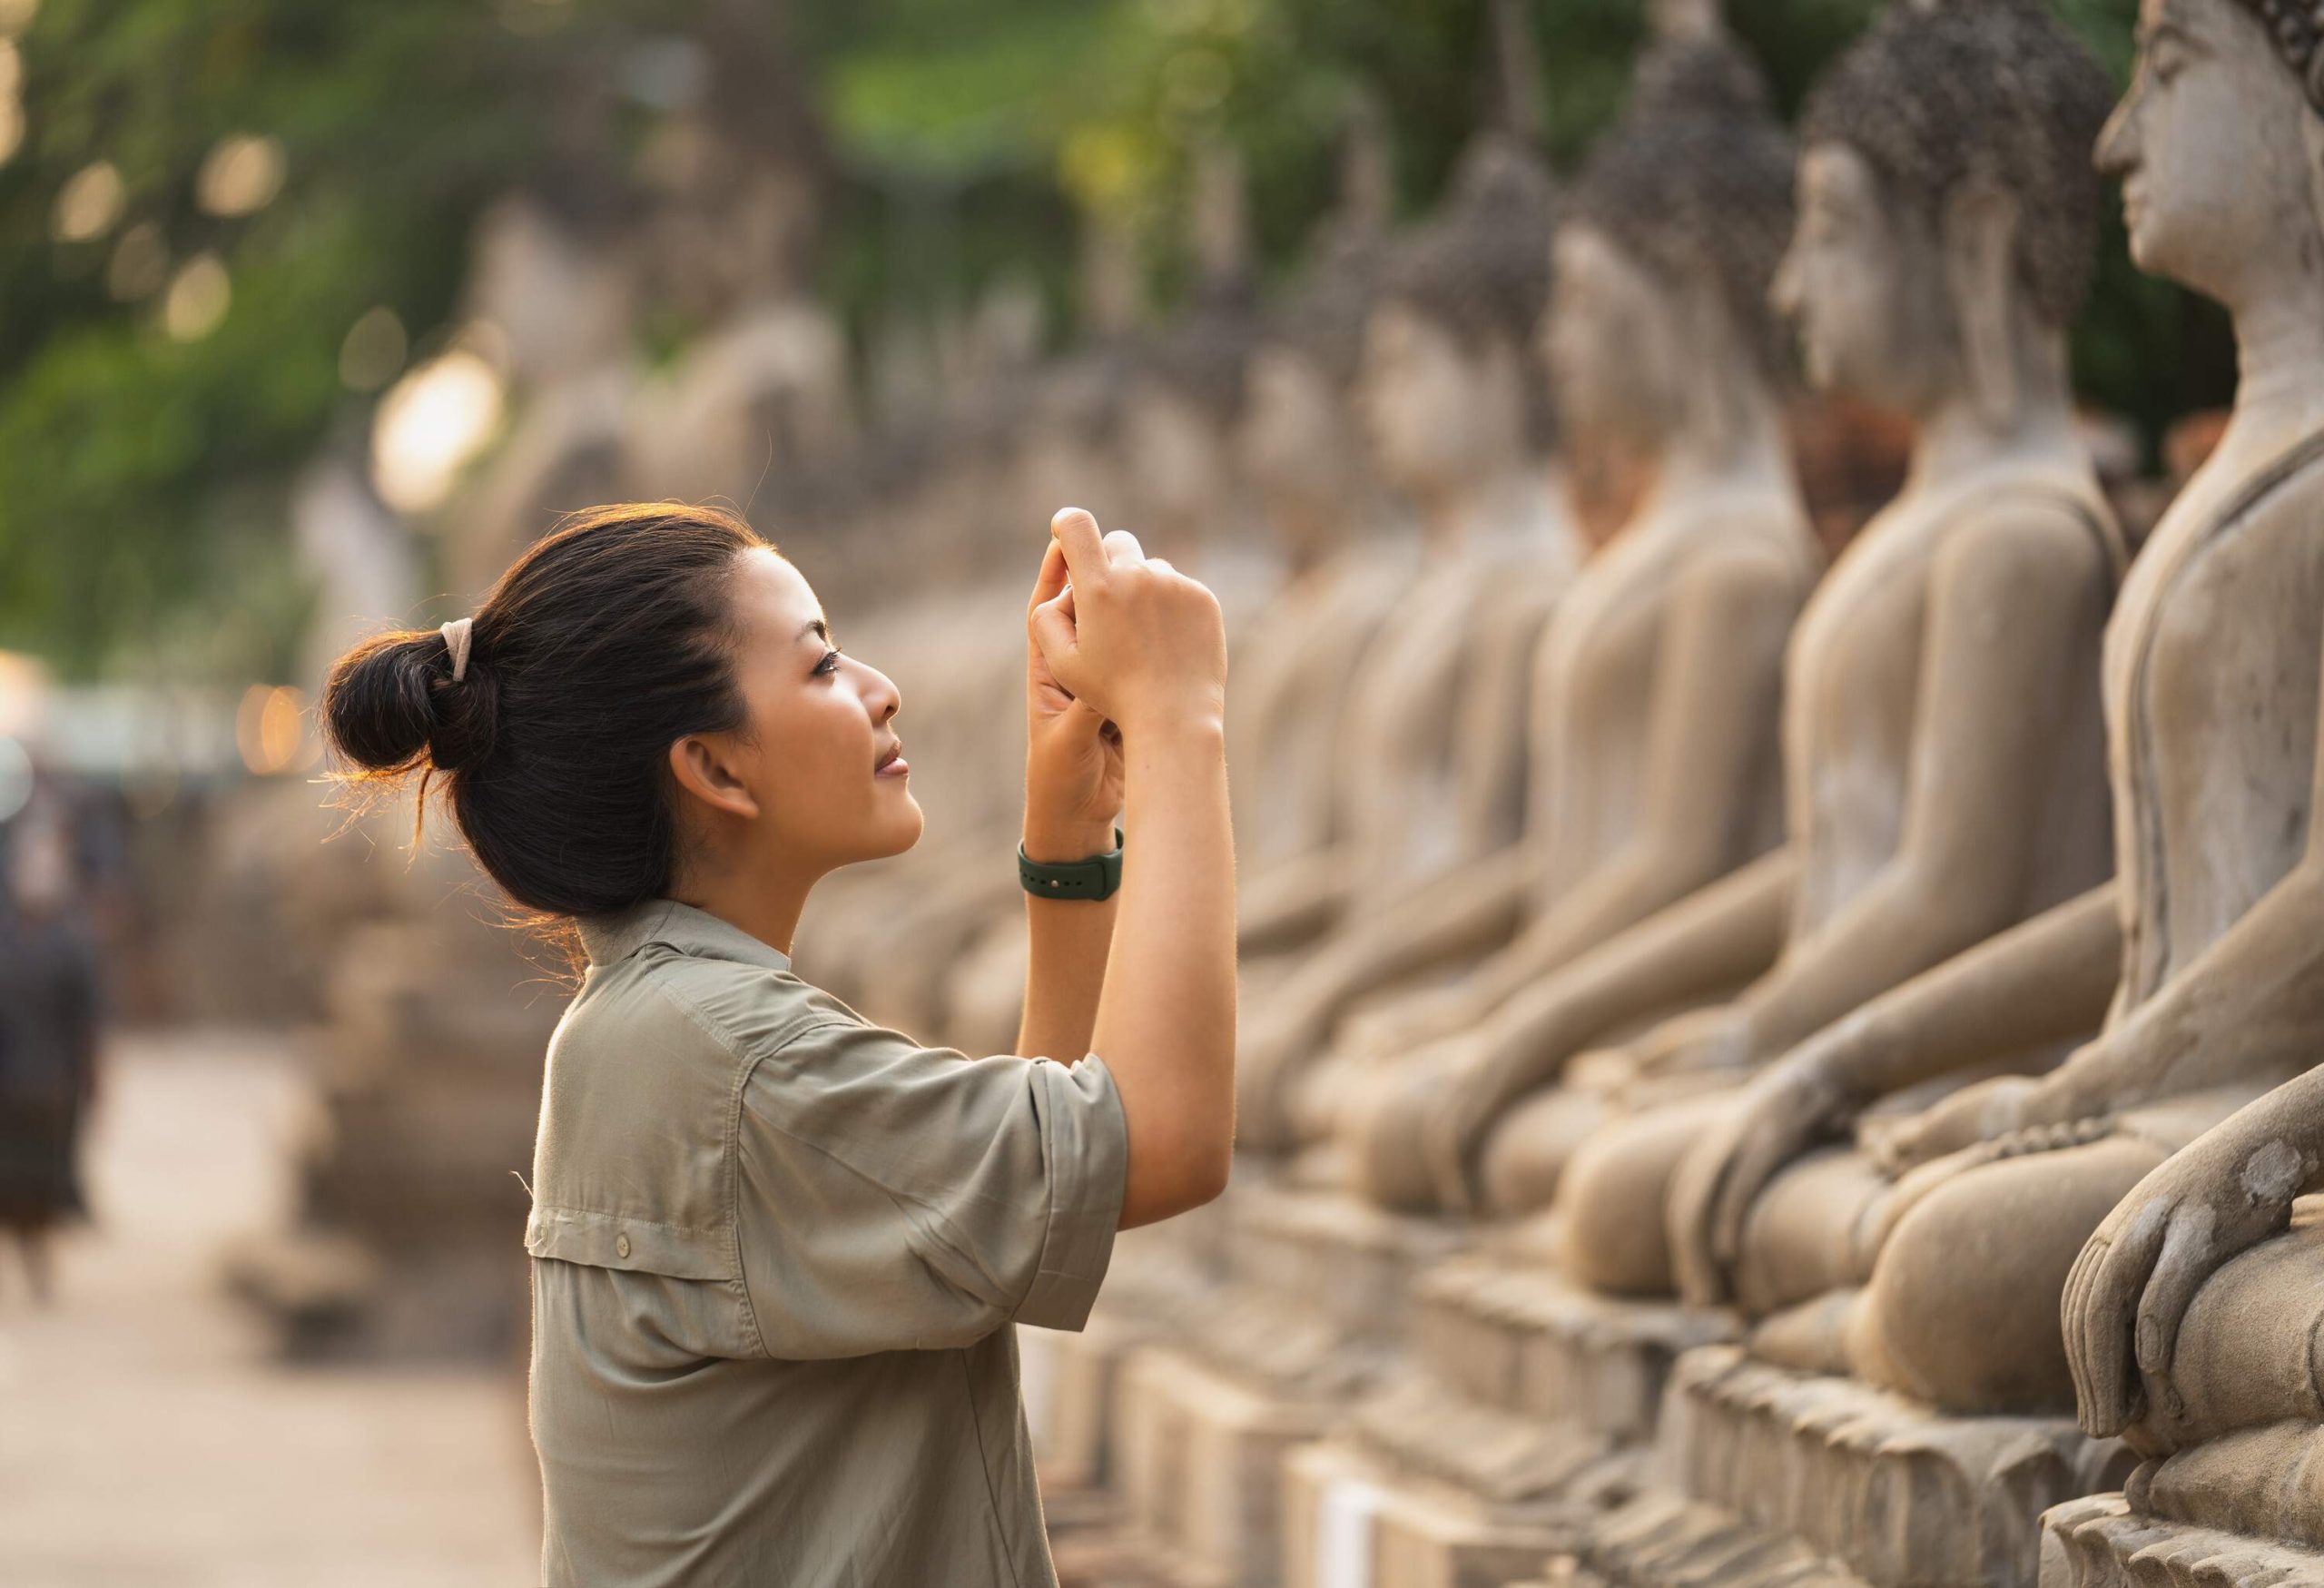 A woman taking photographs of a line of statues.